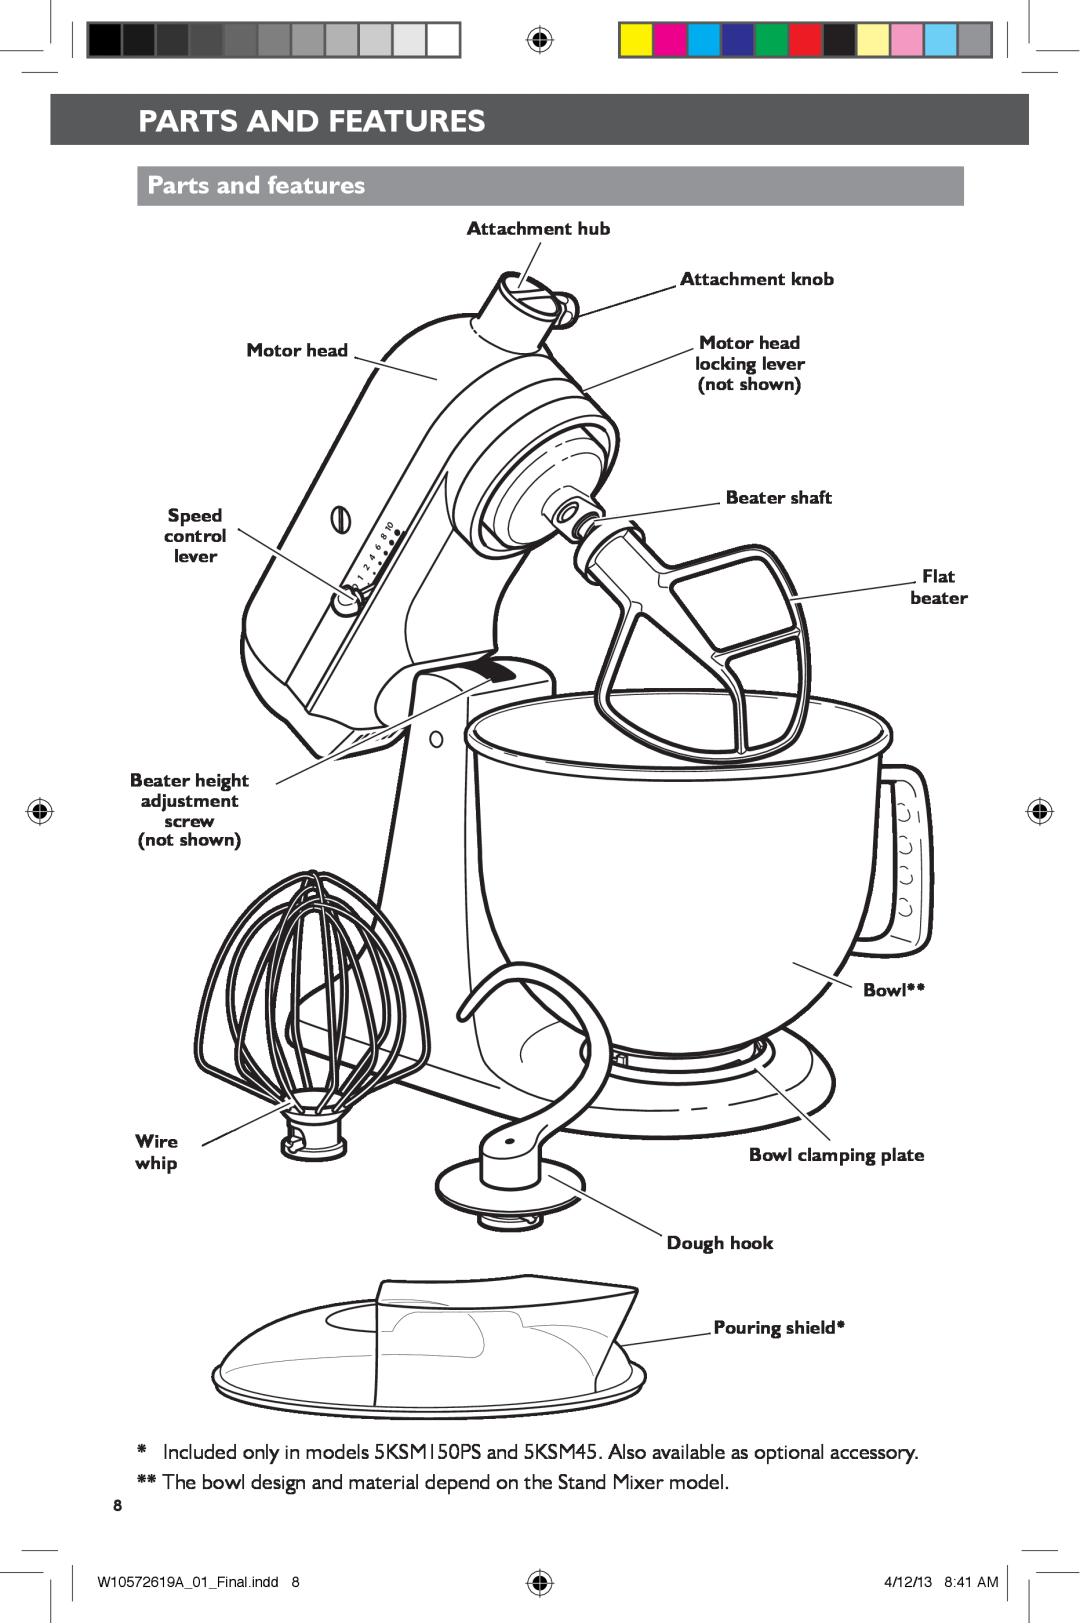 KitchenAid 5KSM45 Parts And Features, Parts and features, The bowl design and material depend on the Stand Mixer model 